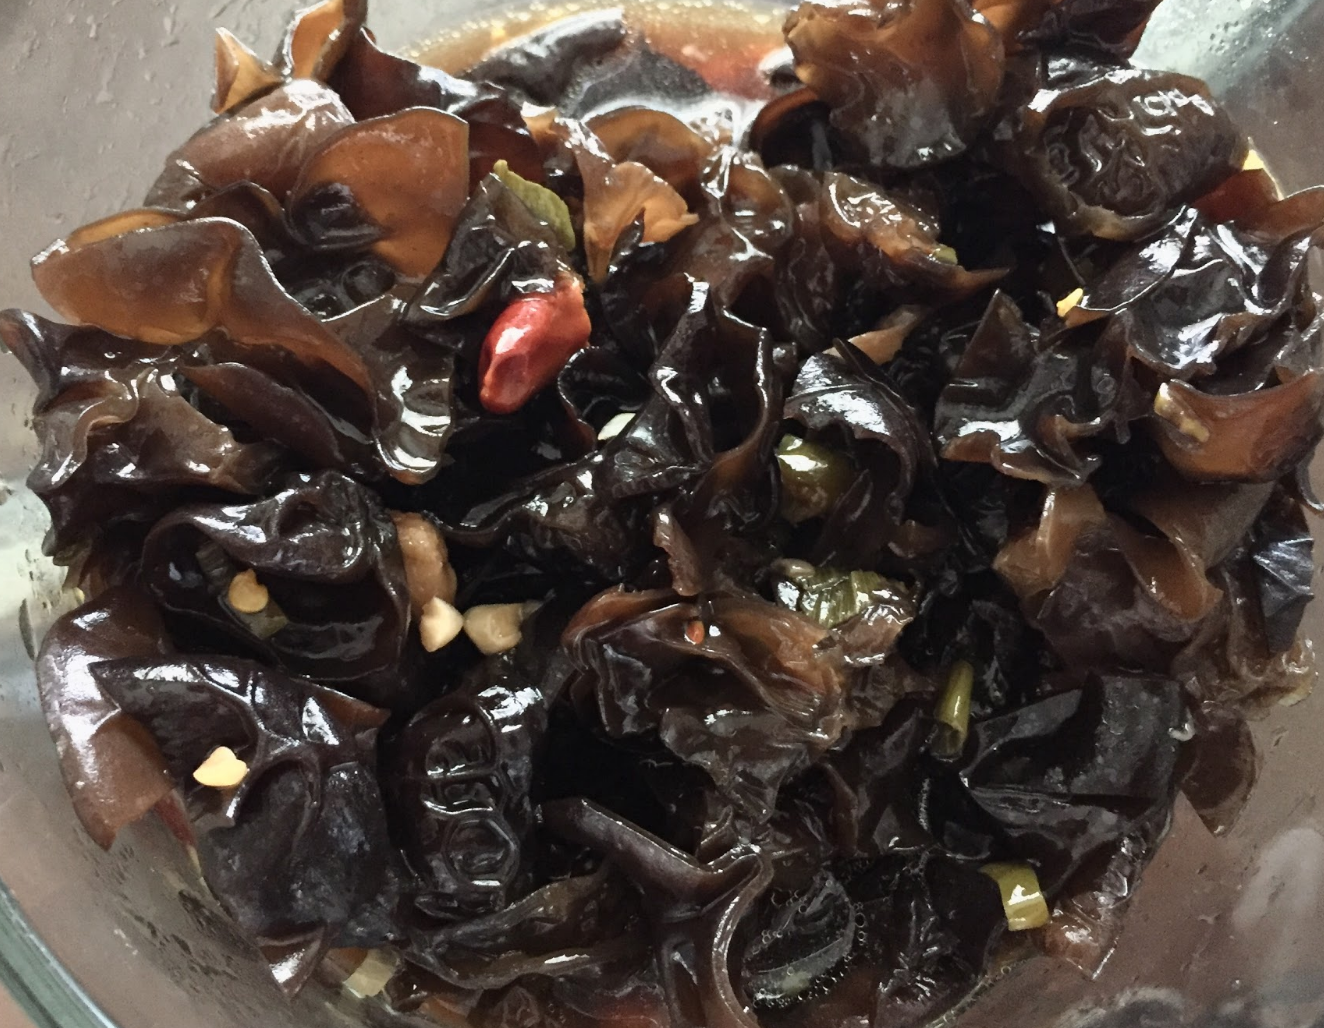 Wood Ear Fungus Salad is eaten with black vinegar, soy sauce dressing. Credit: Rachel Chang / The Foothill Dragon Press